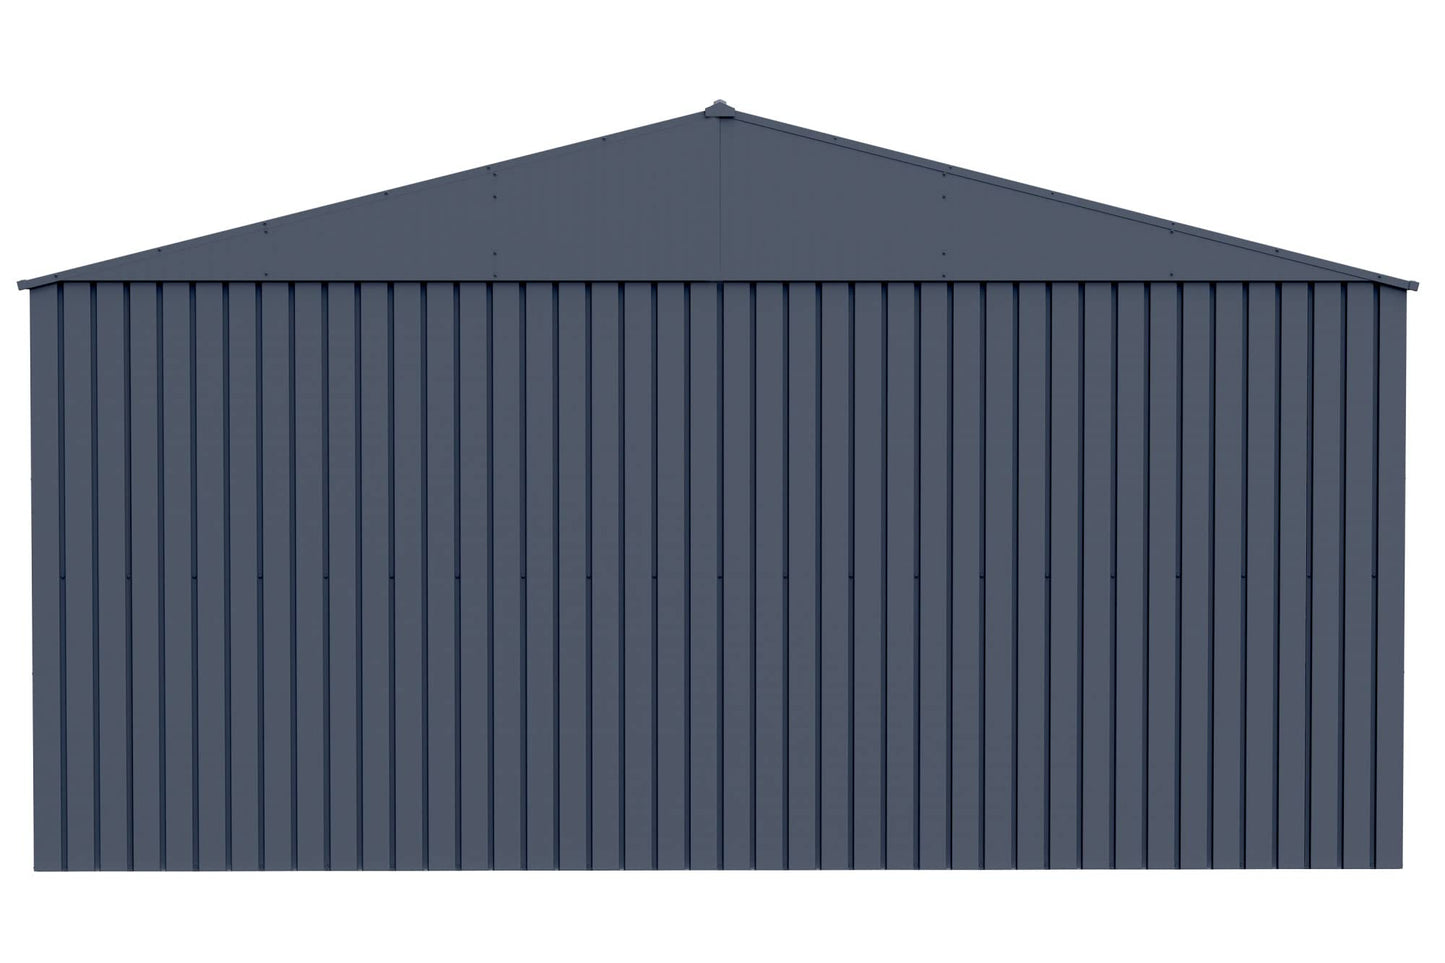 Arrow Shed Elite 14' x 16' Outdoor Lockable Gable Roof Steel Storage Shed Building, Anthracite